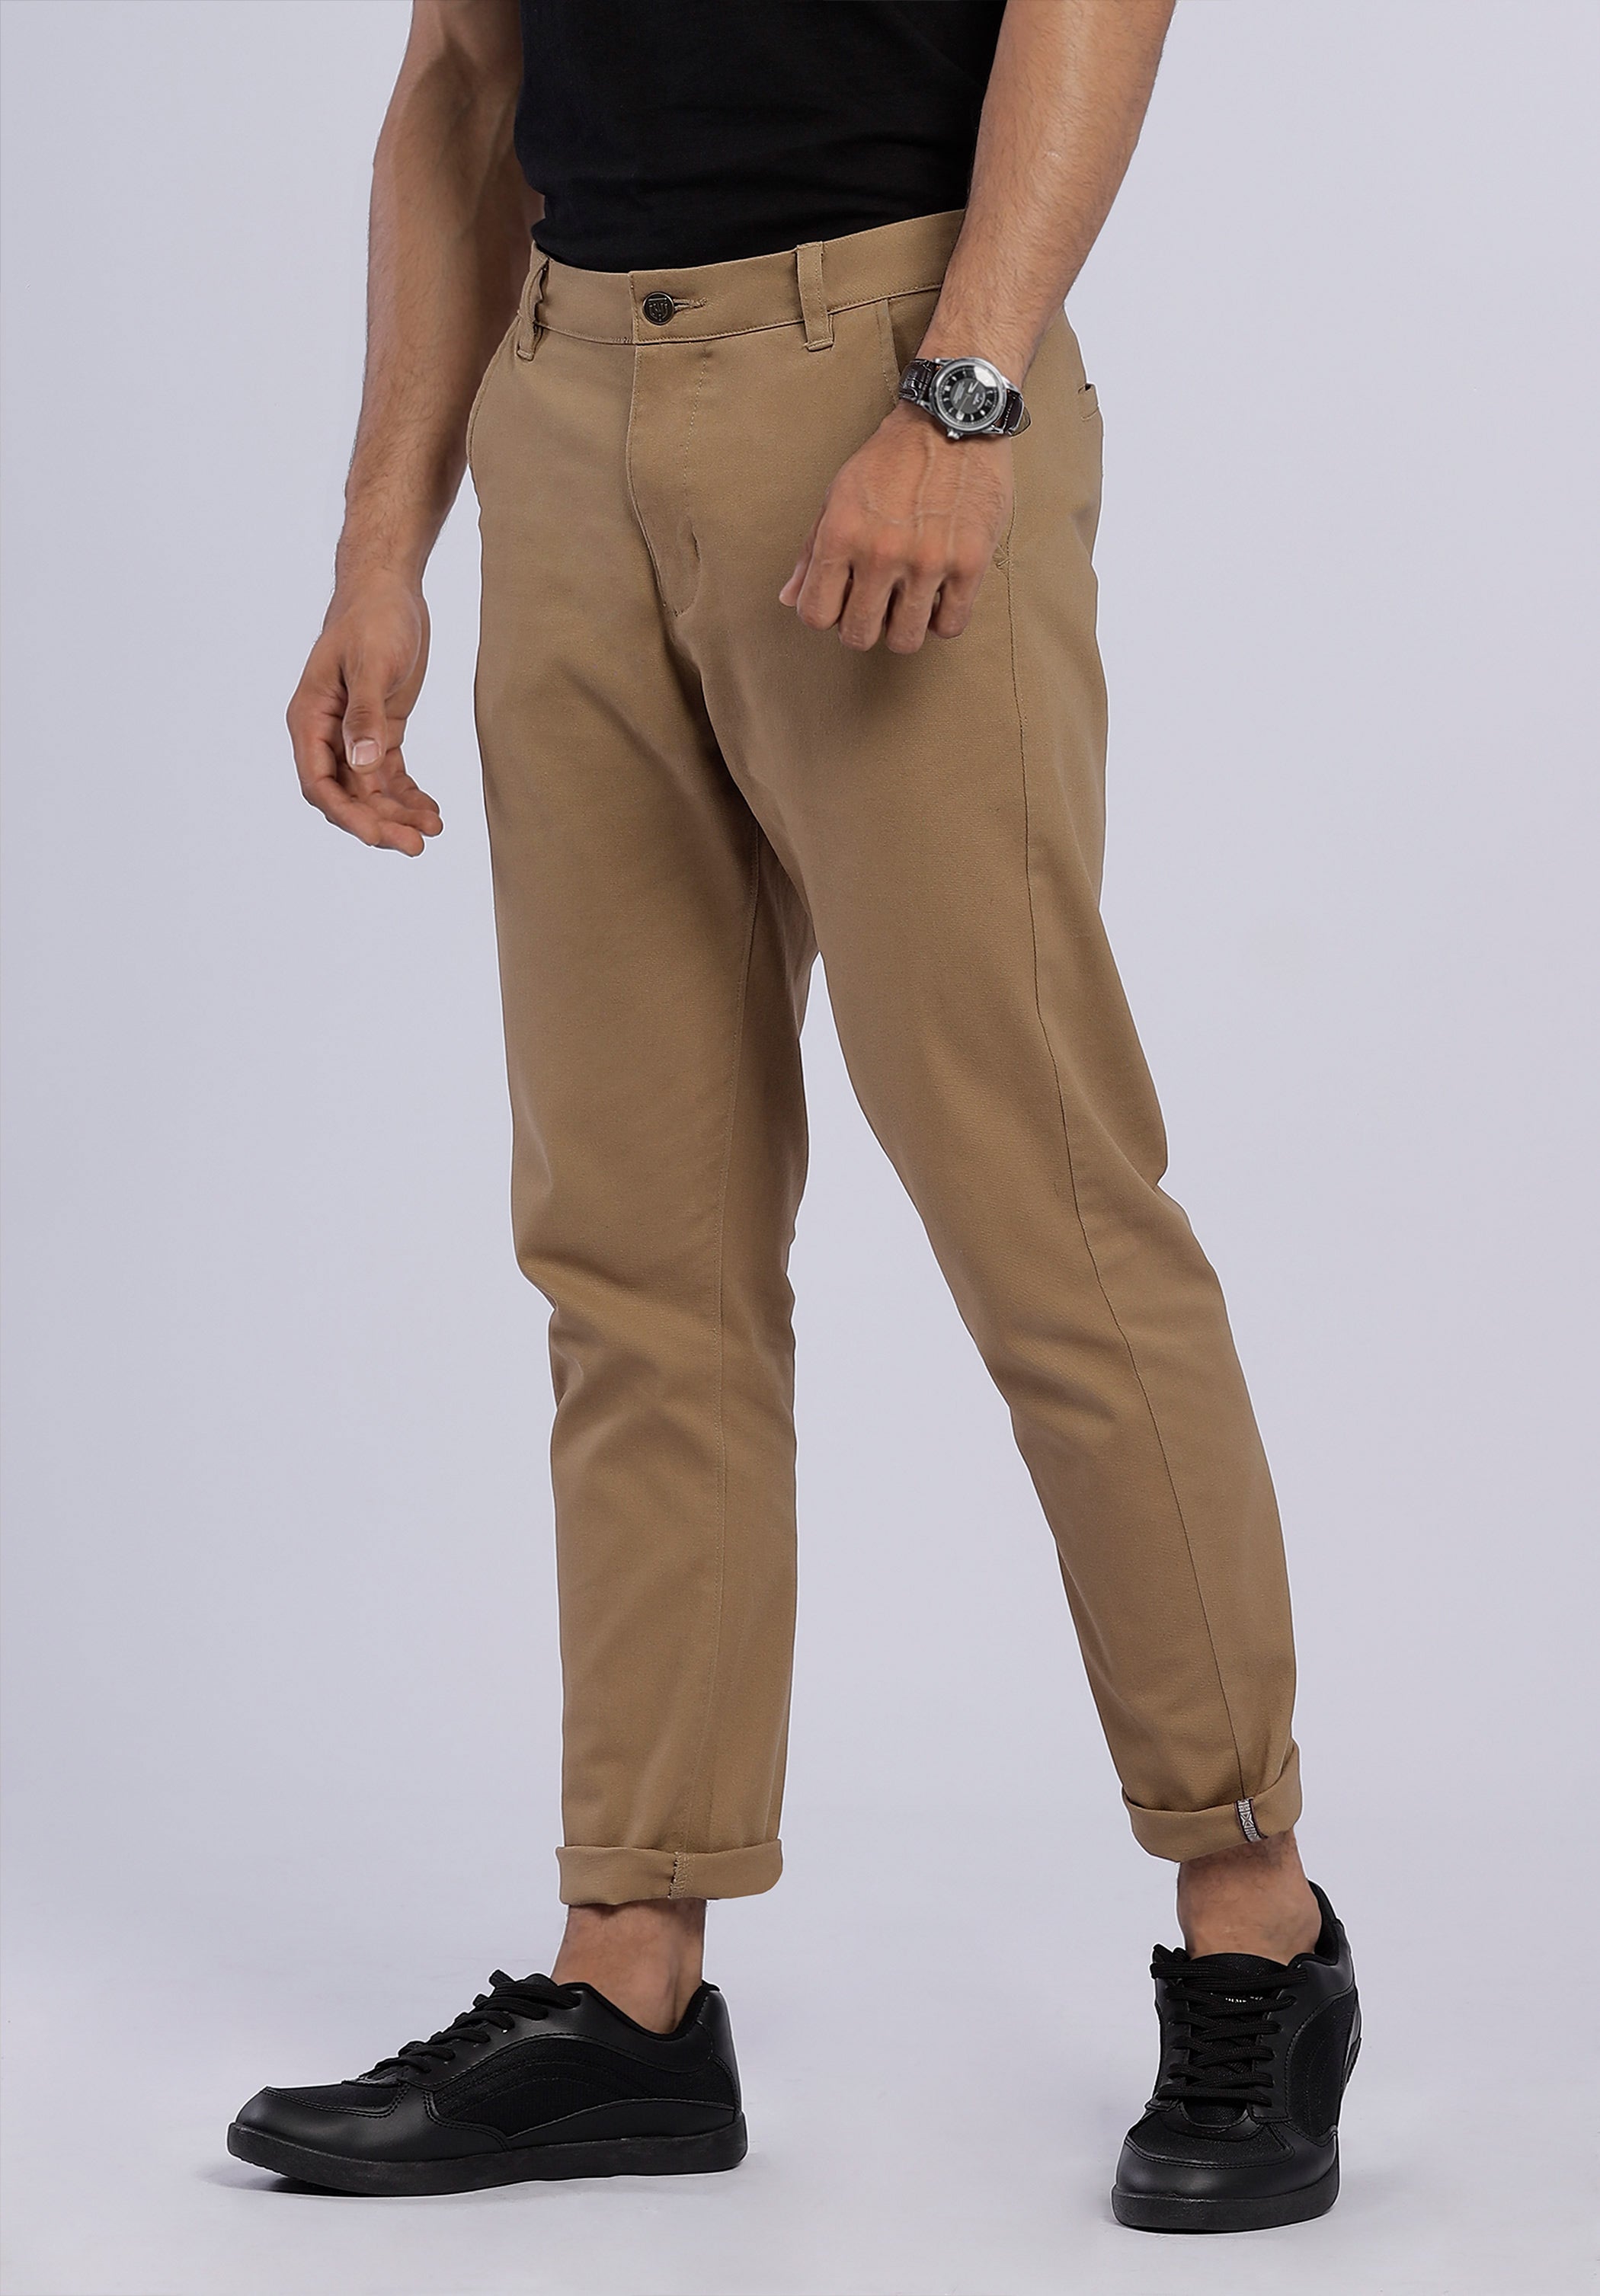 Casual Pants and Chinos for Men in Nepal. – Harrington Nepal